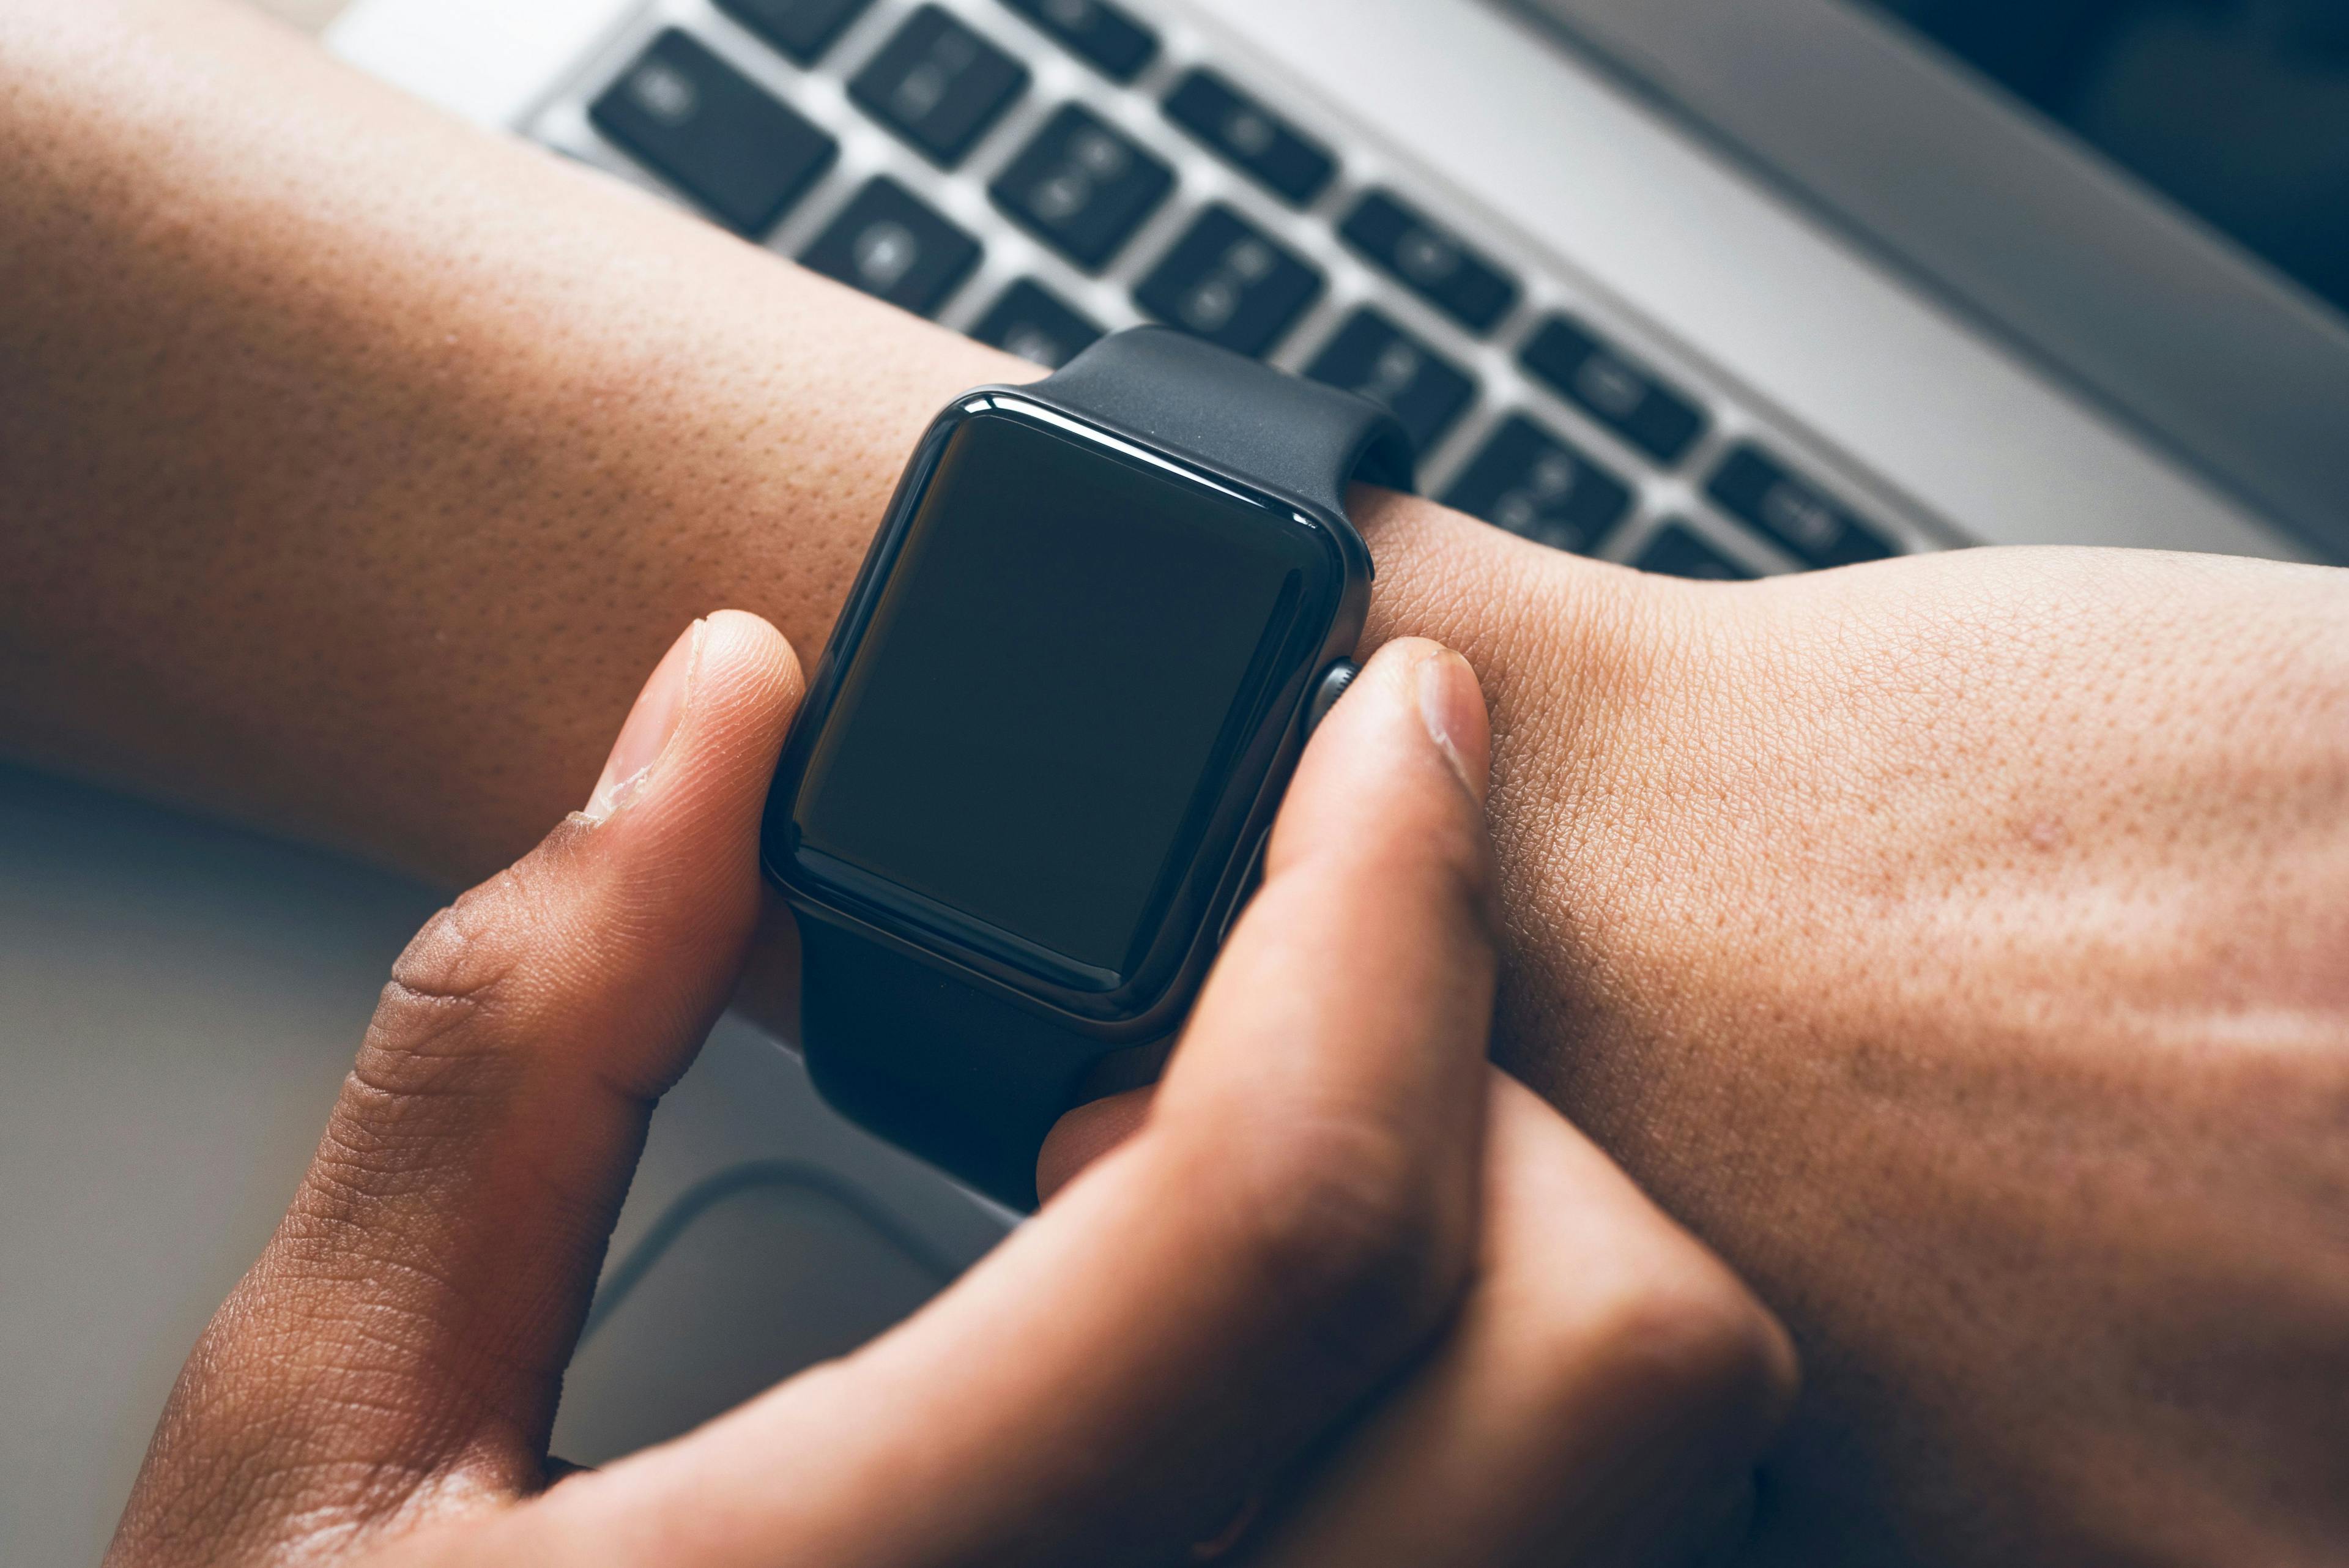 Model Accurately Predicts SCD Pain Scores Using Apple Watch Data